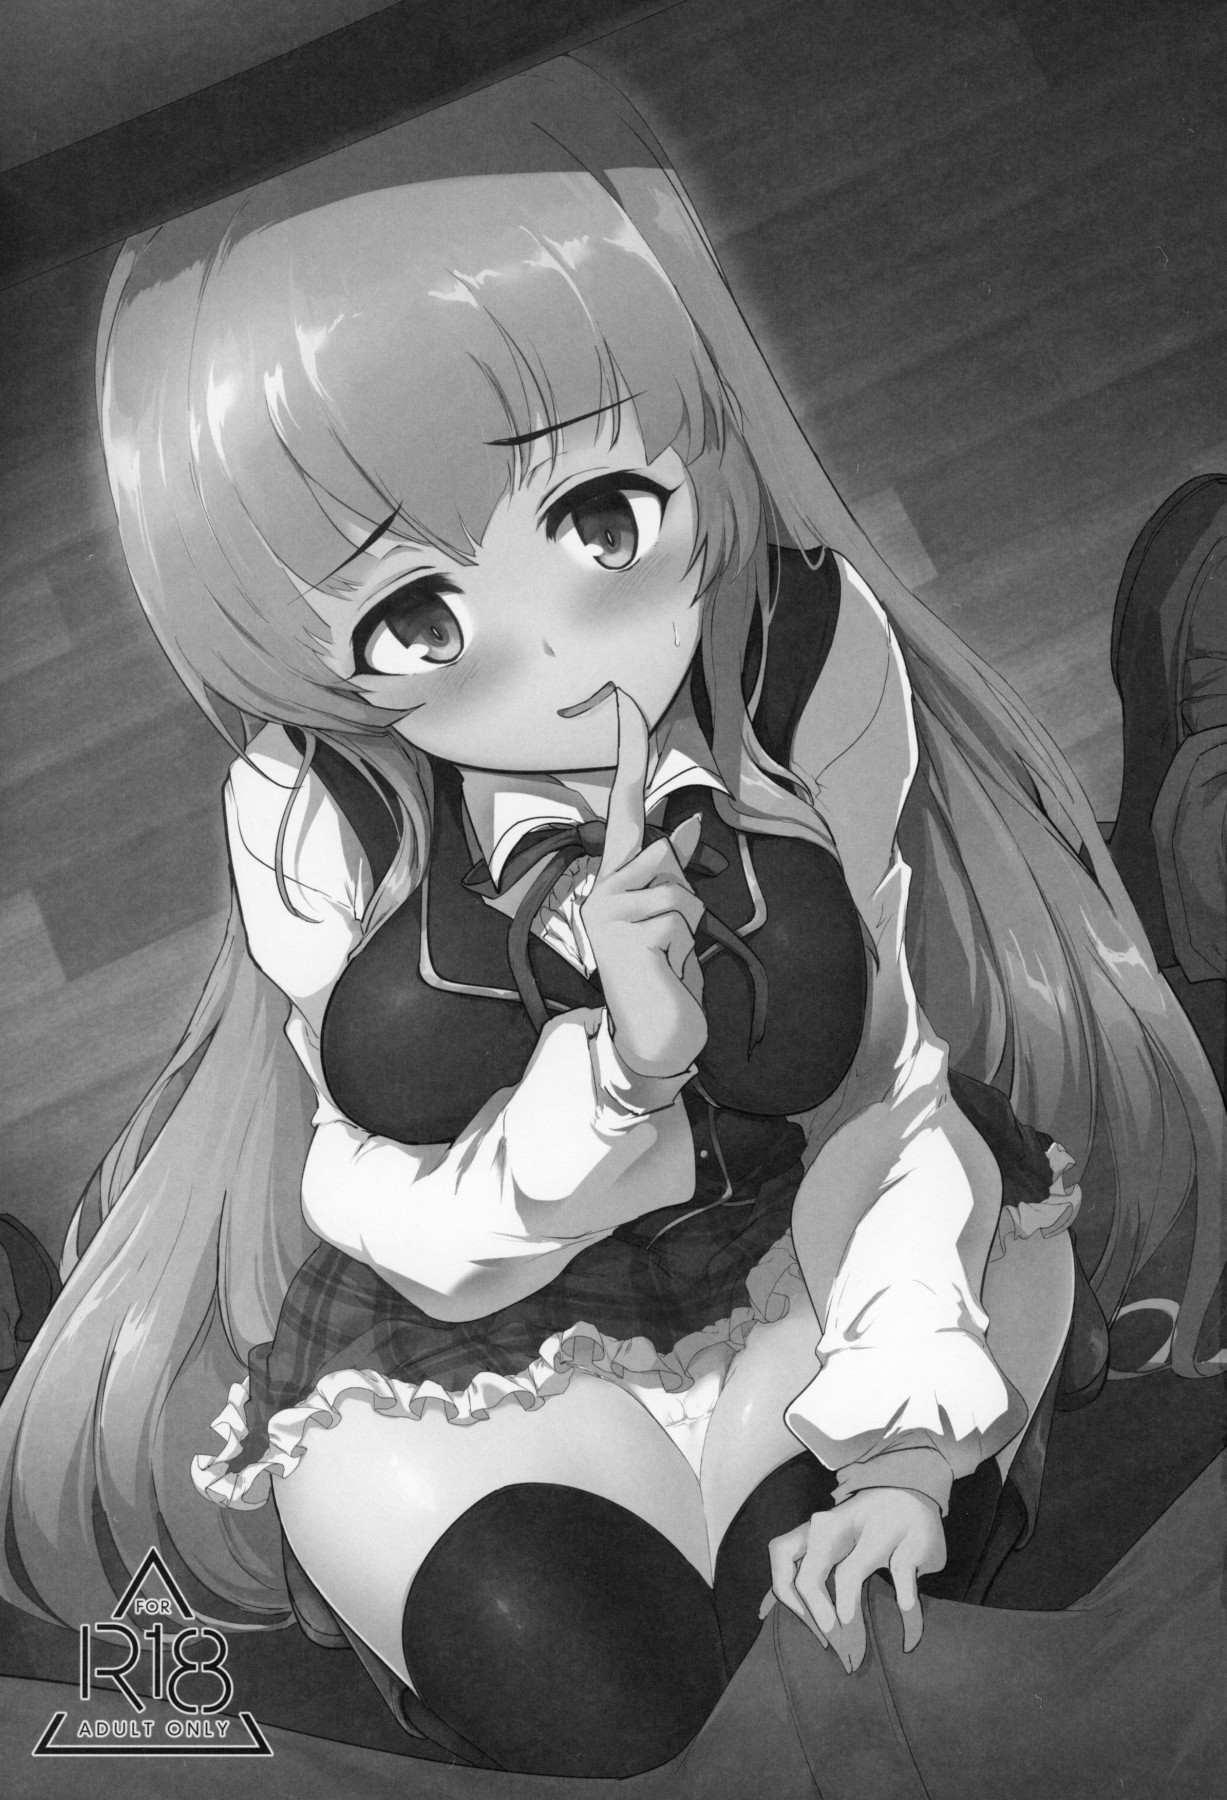 Hentai Manga Comic-Manaria There's No Way There'd Be a Lewd Event at Manaria Academy With The Kingdom's Princess-Read-2